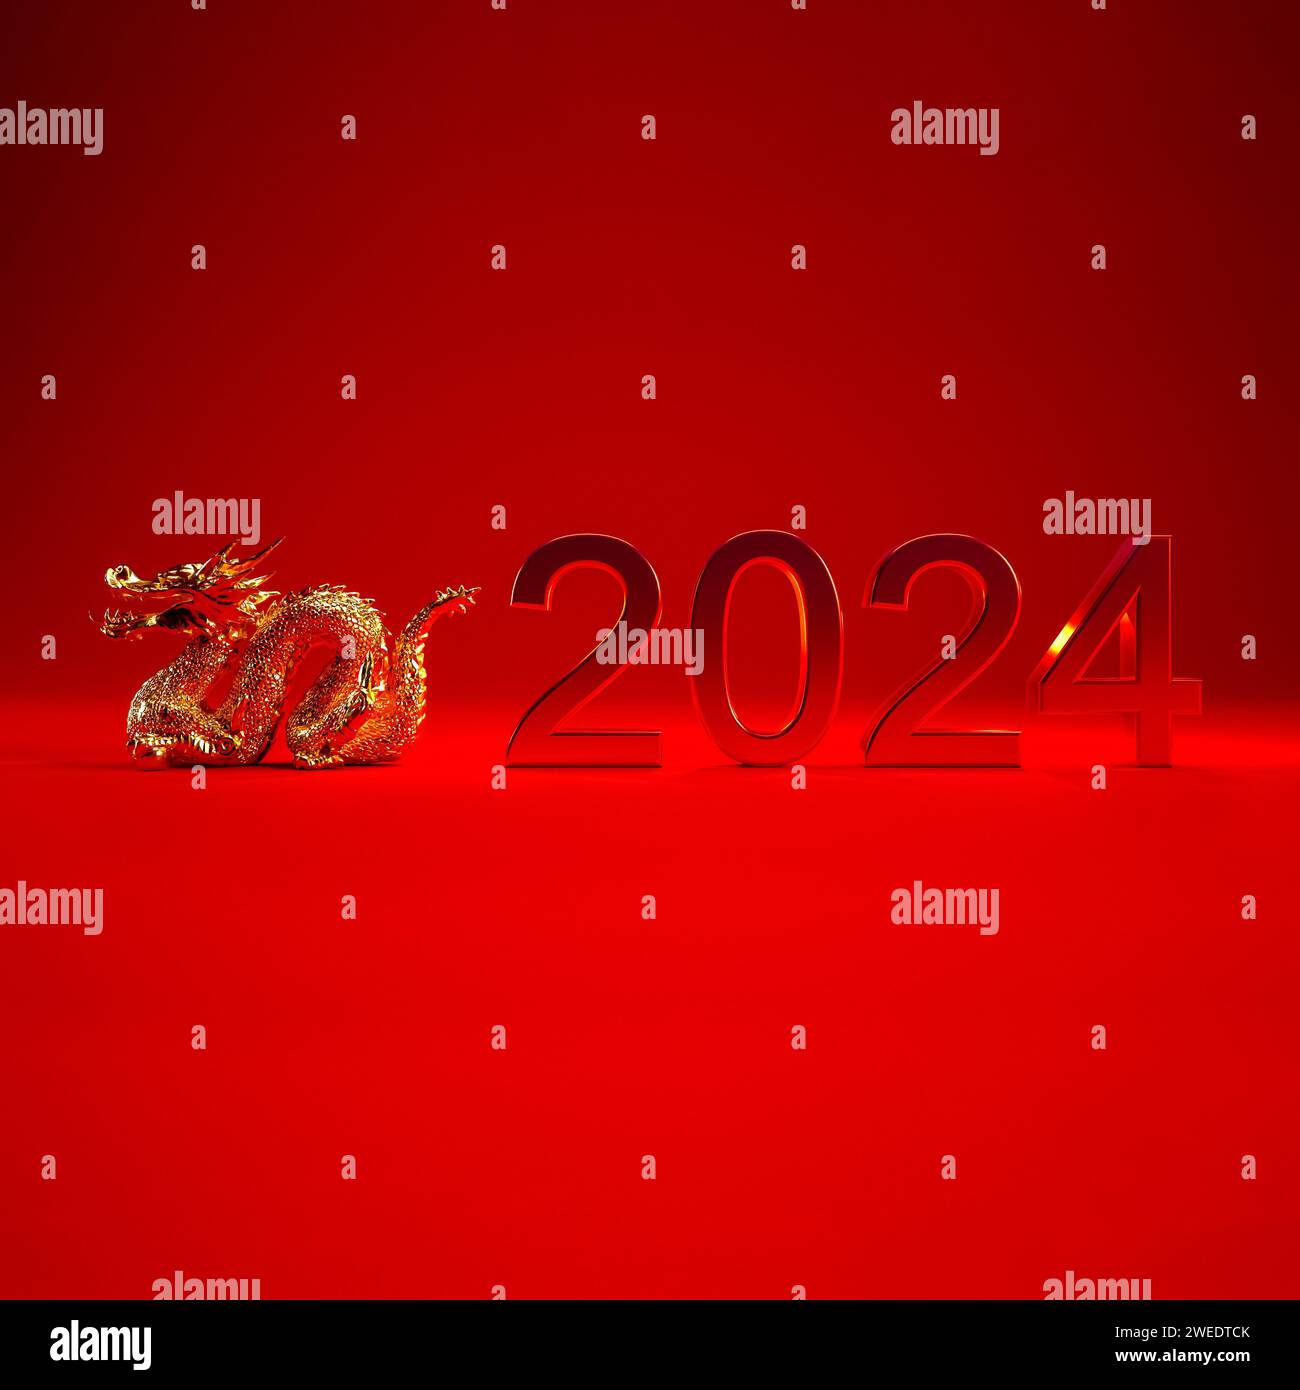 Chinese New Year 2024 background, year of the dragon concept 2024 3d text isolated on red background. Stock Photo